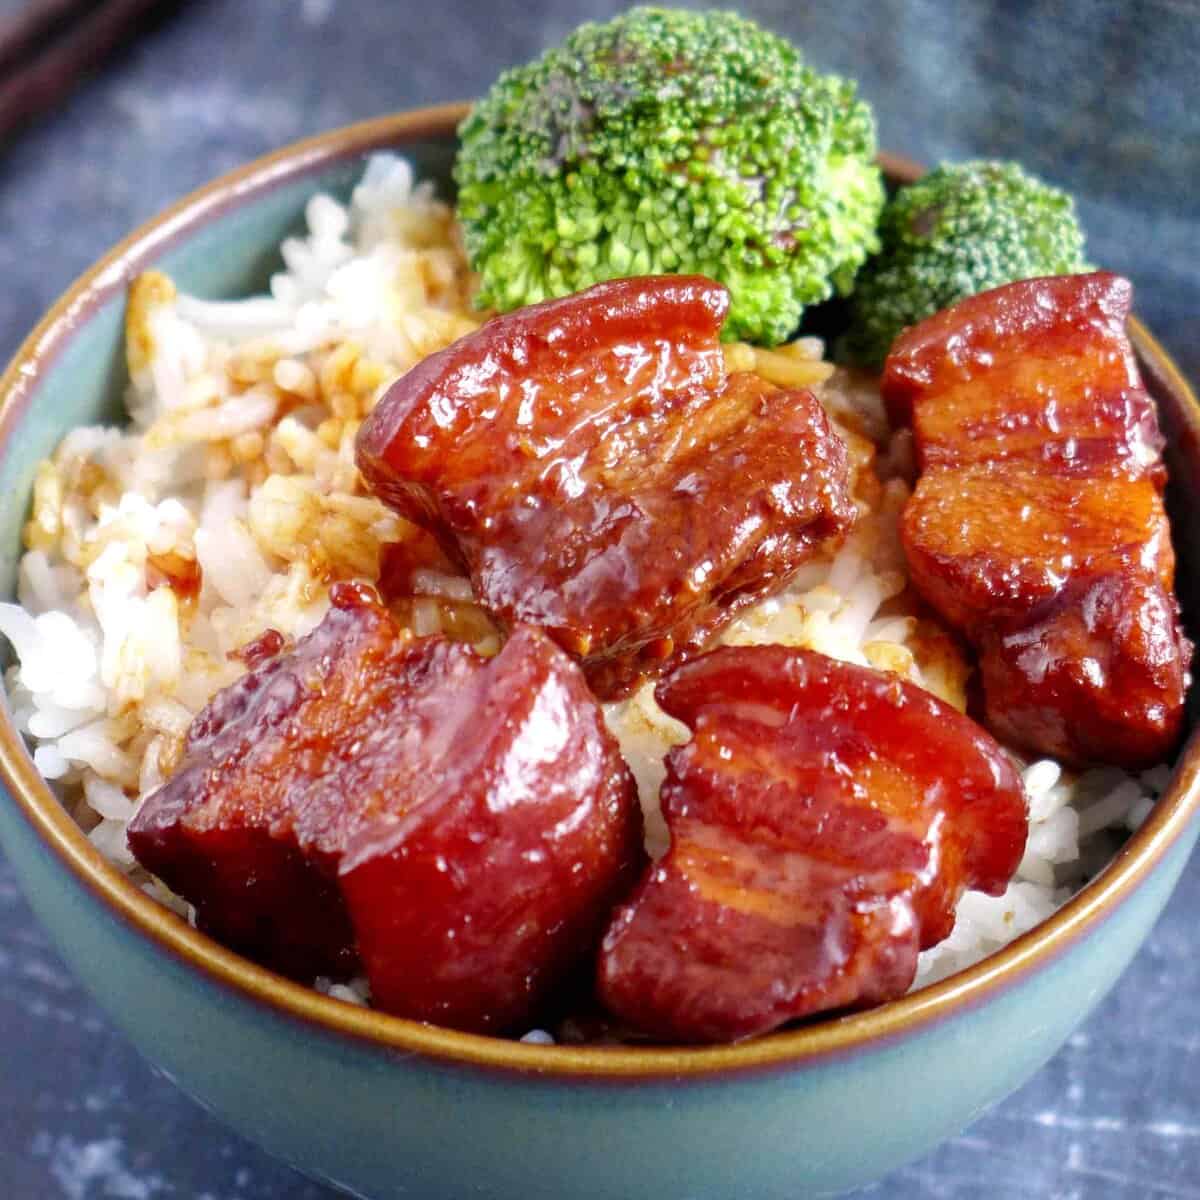 https://redhousespice.com/wp-content/uploads/2021/01/braised-pork-belly-over-rice.jpg